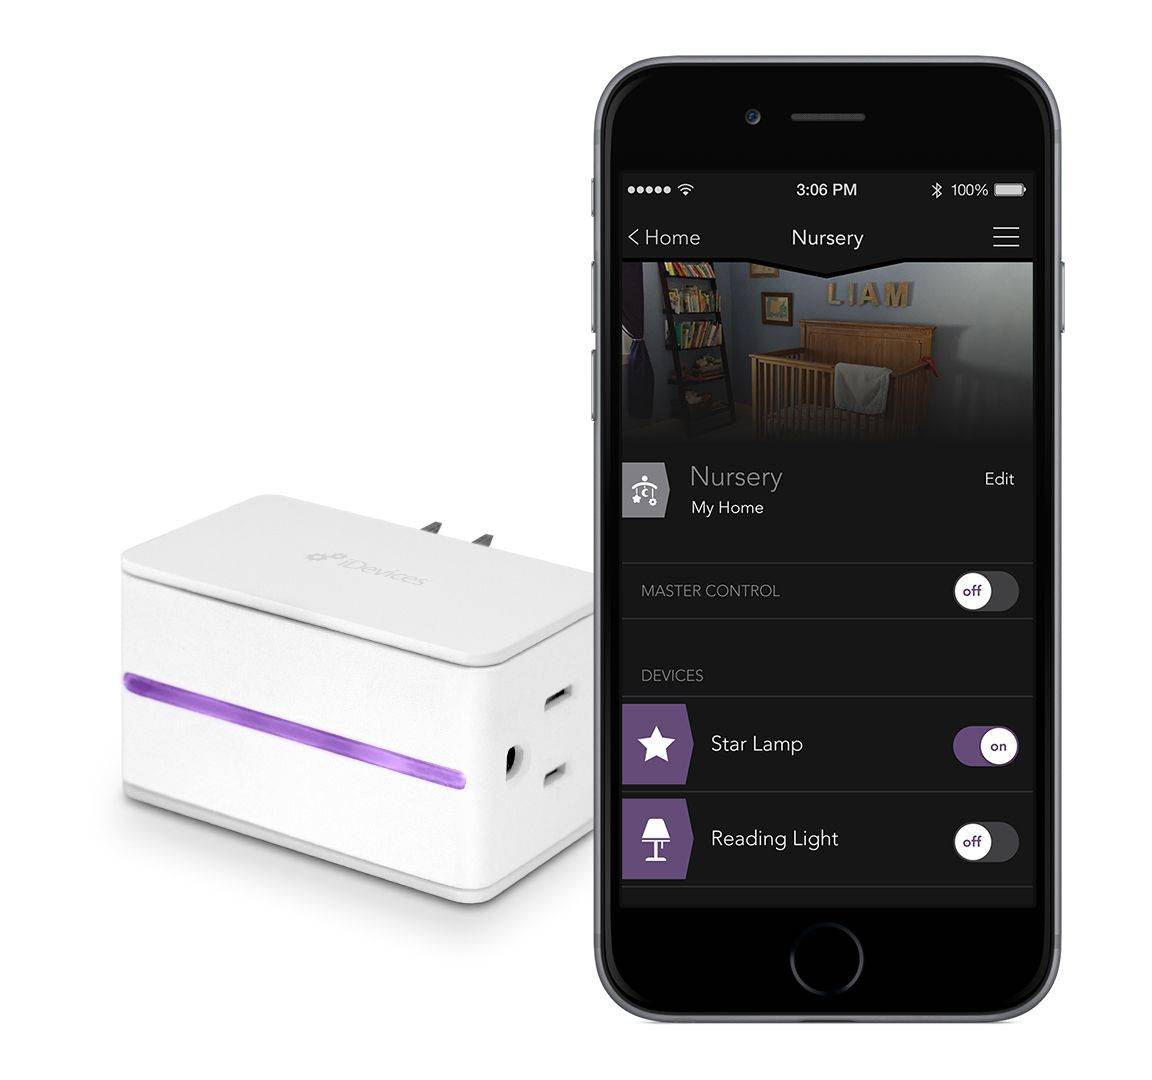 iDevices' HomeKit-compatible Switch lets you control anything you plug into it using an iOS app. Photo: iDevices